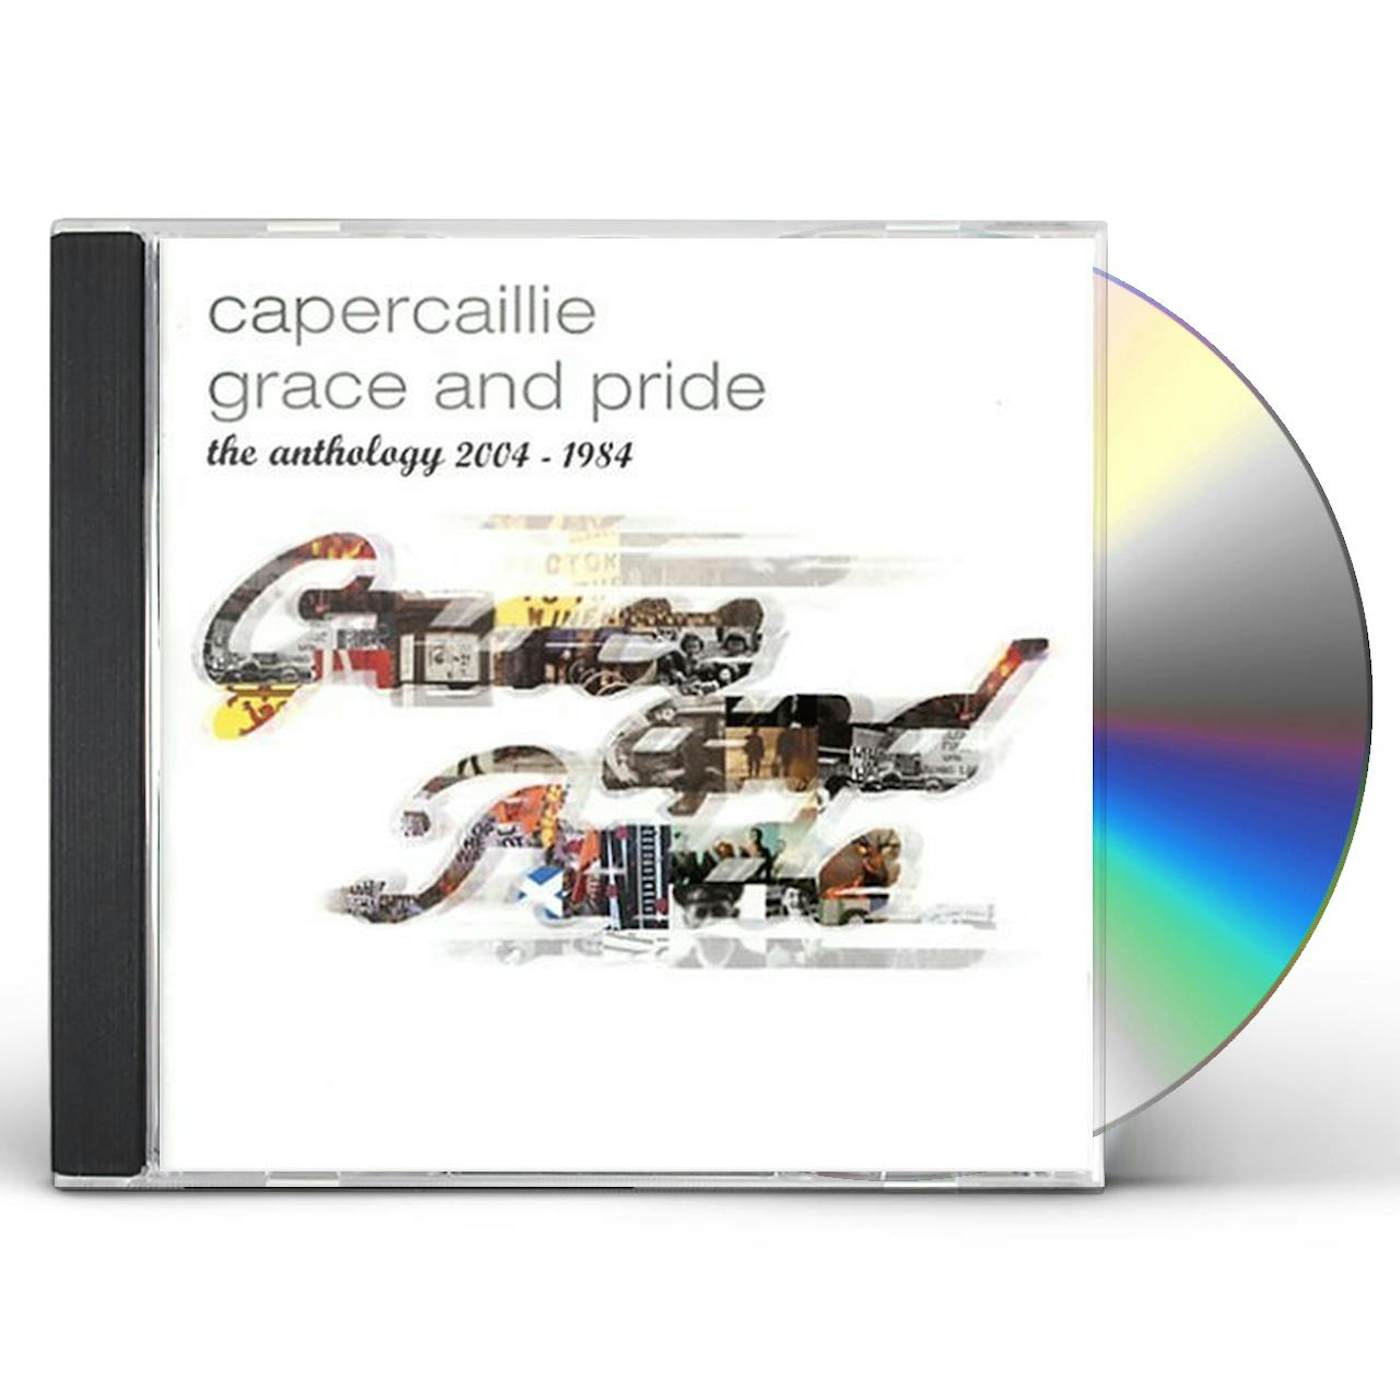 Capercaillie GRACE & PRIDE: ANTHOLOGY 2004 - 1984 CD